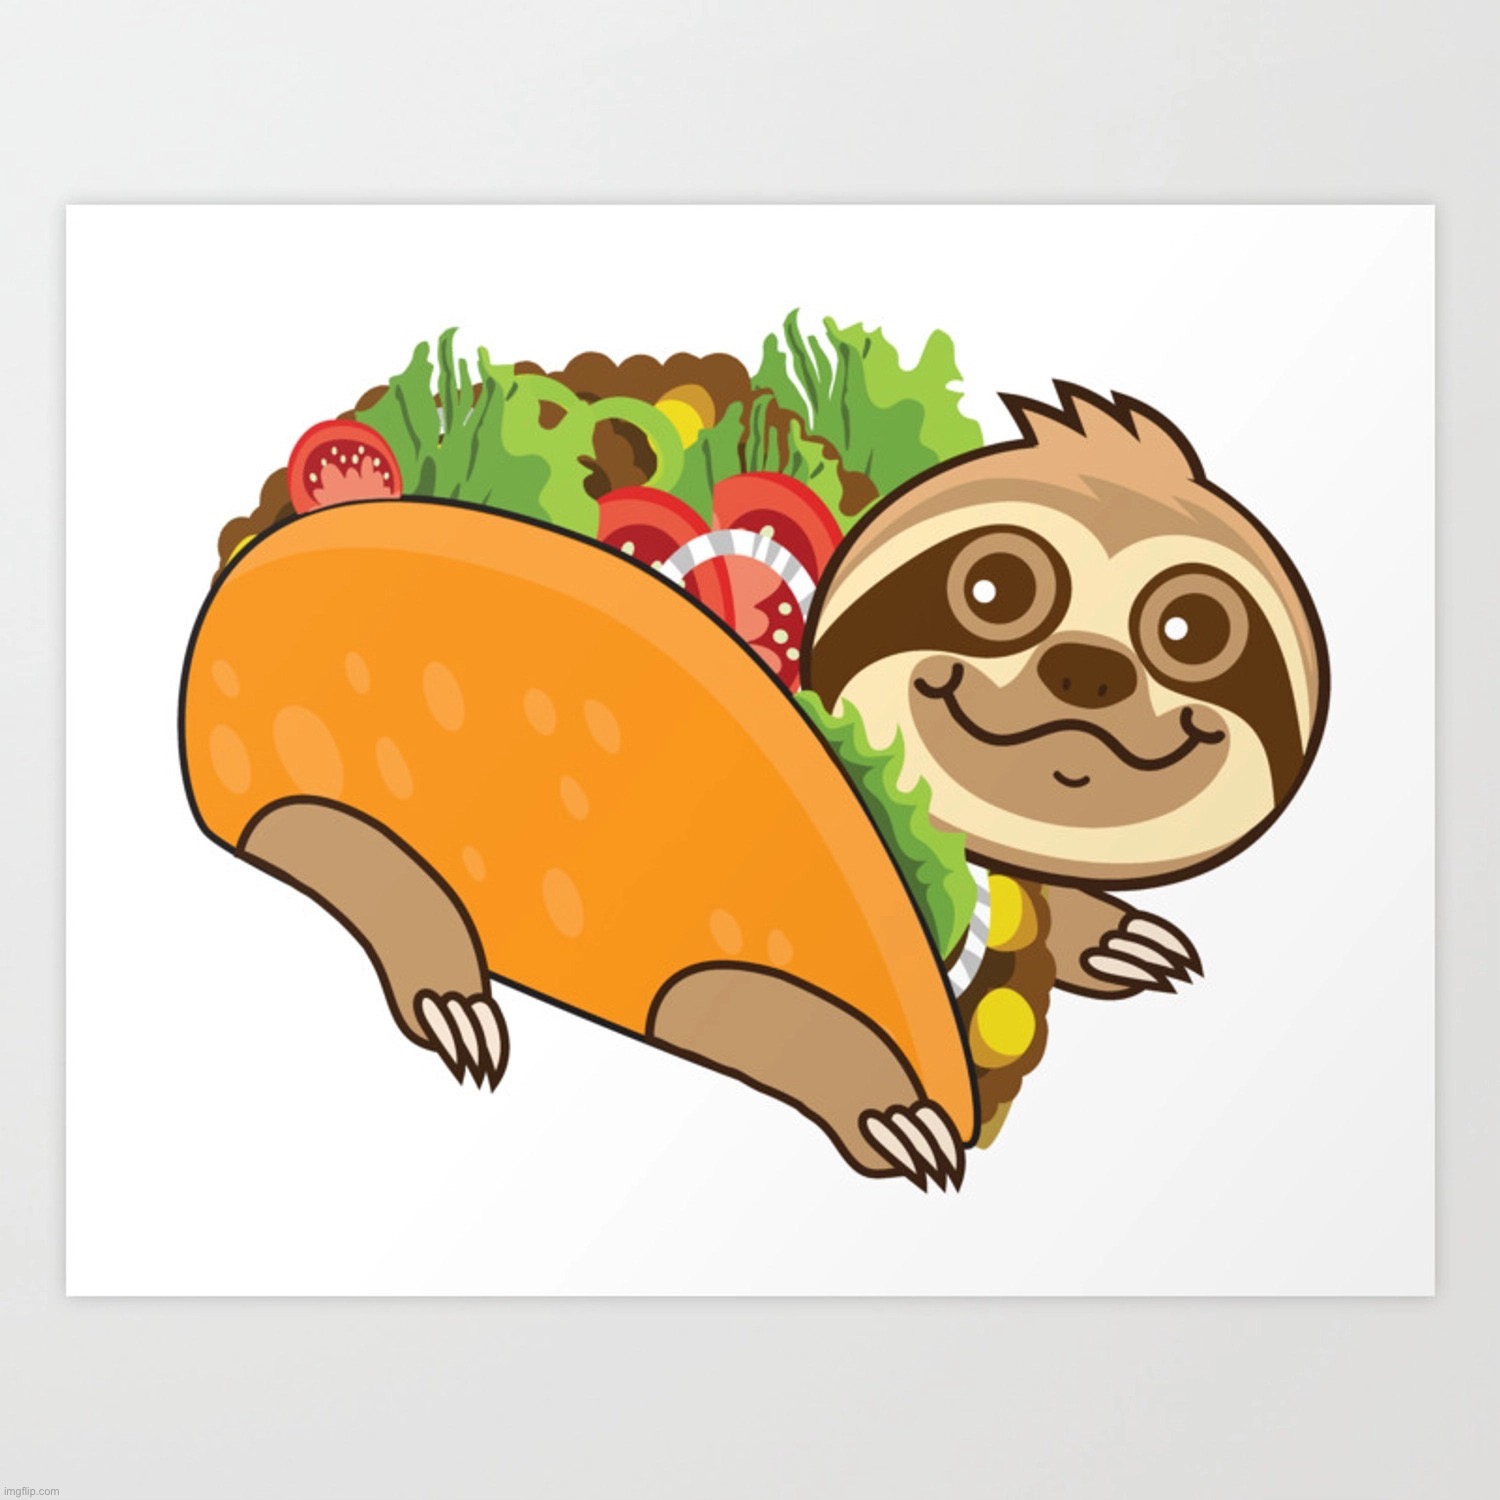 Taco sloth | image tagged in taco sloth | made w/ Imgflip meme maker